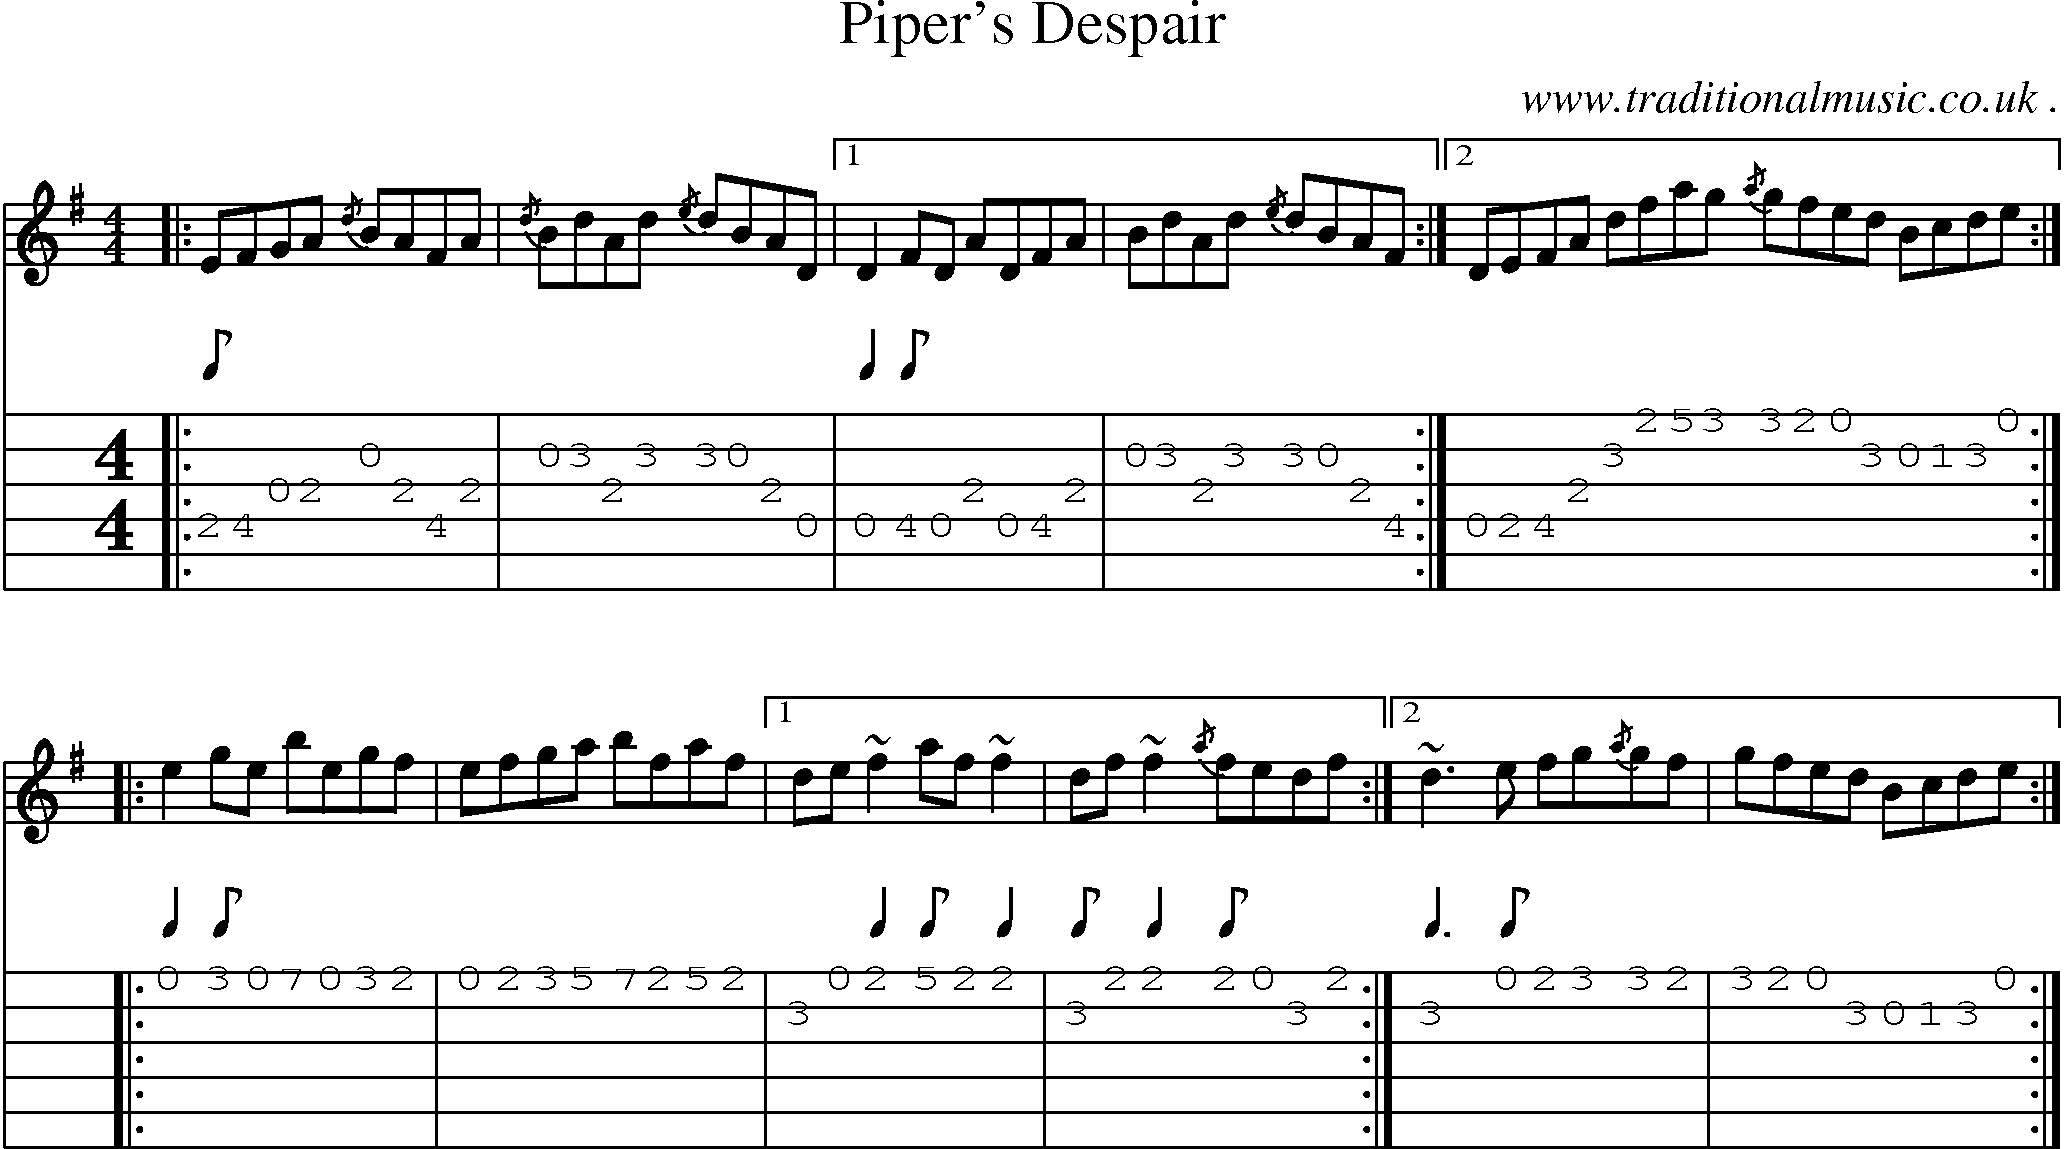 Sheet-music  score, Chords and Guitar Tabs for Pipers Despair